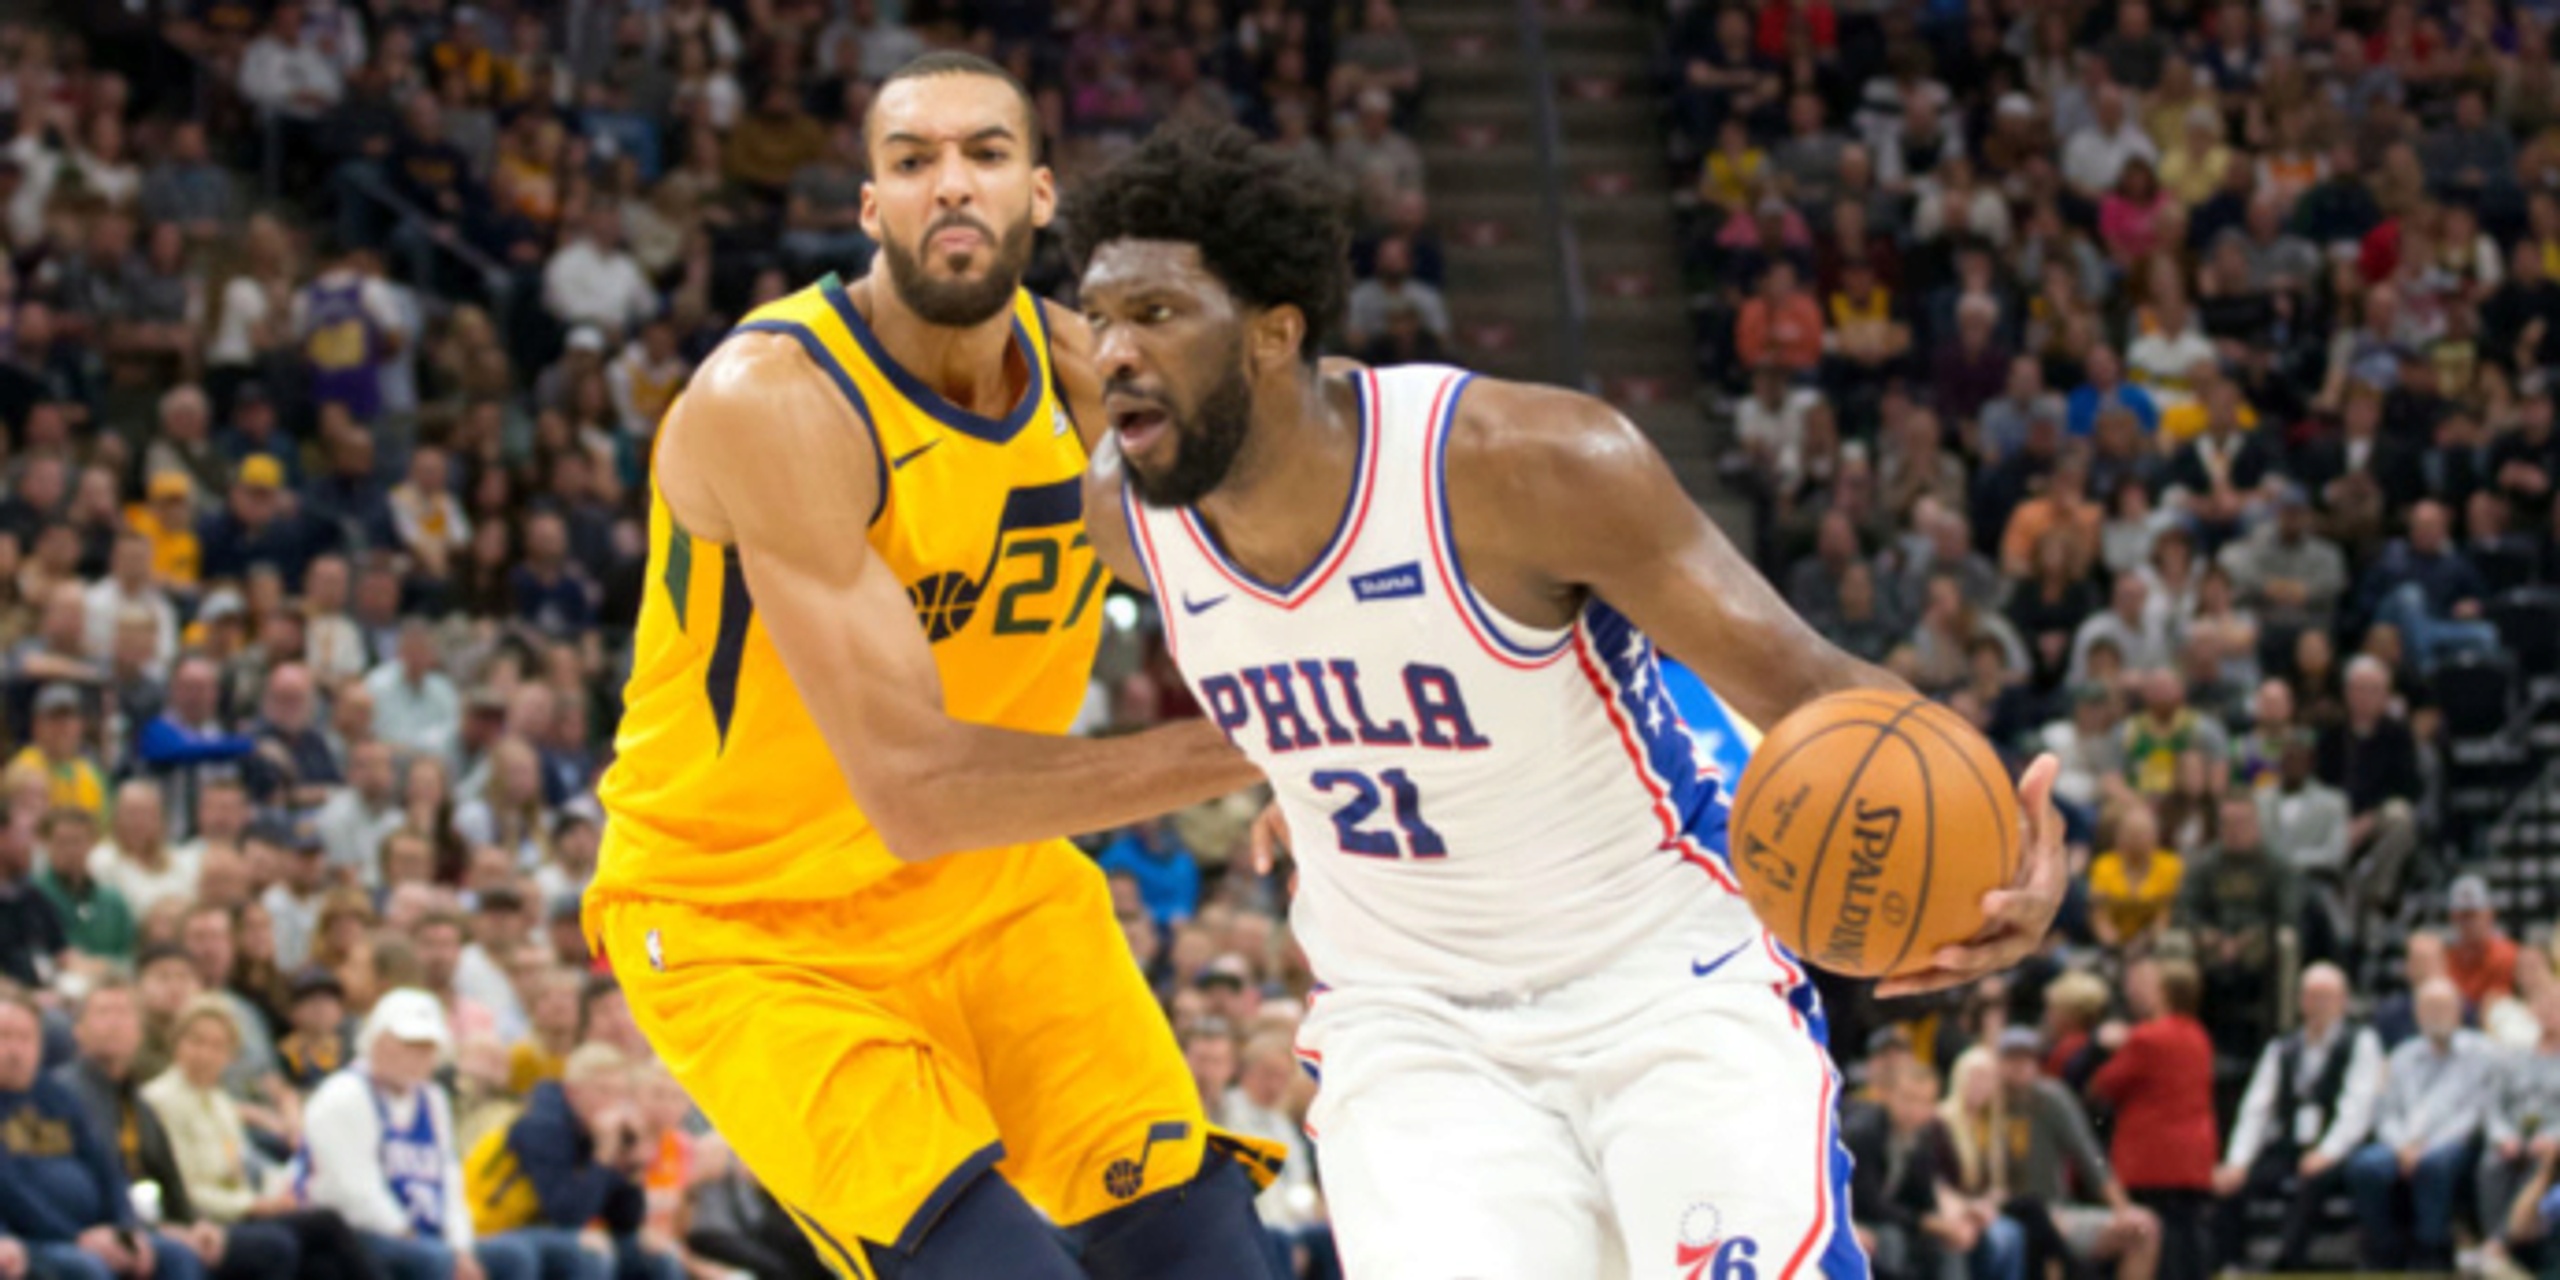 We’re not talking enough about Joel Embiid possibly playing for France